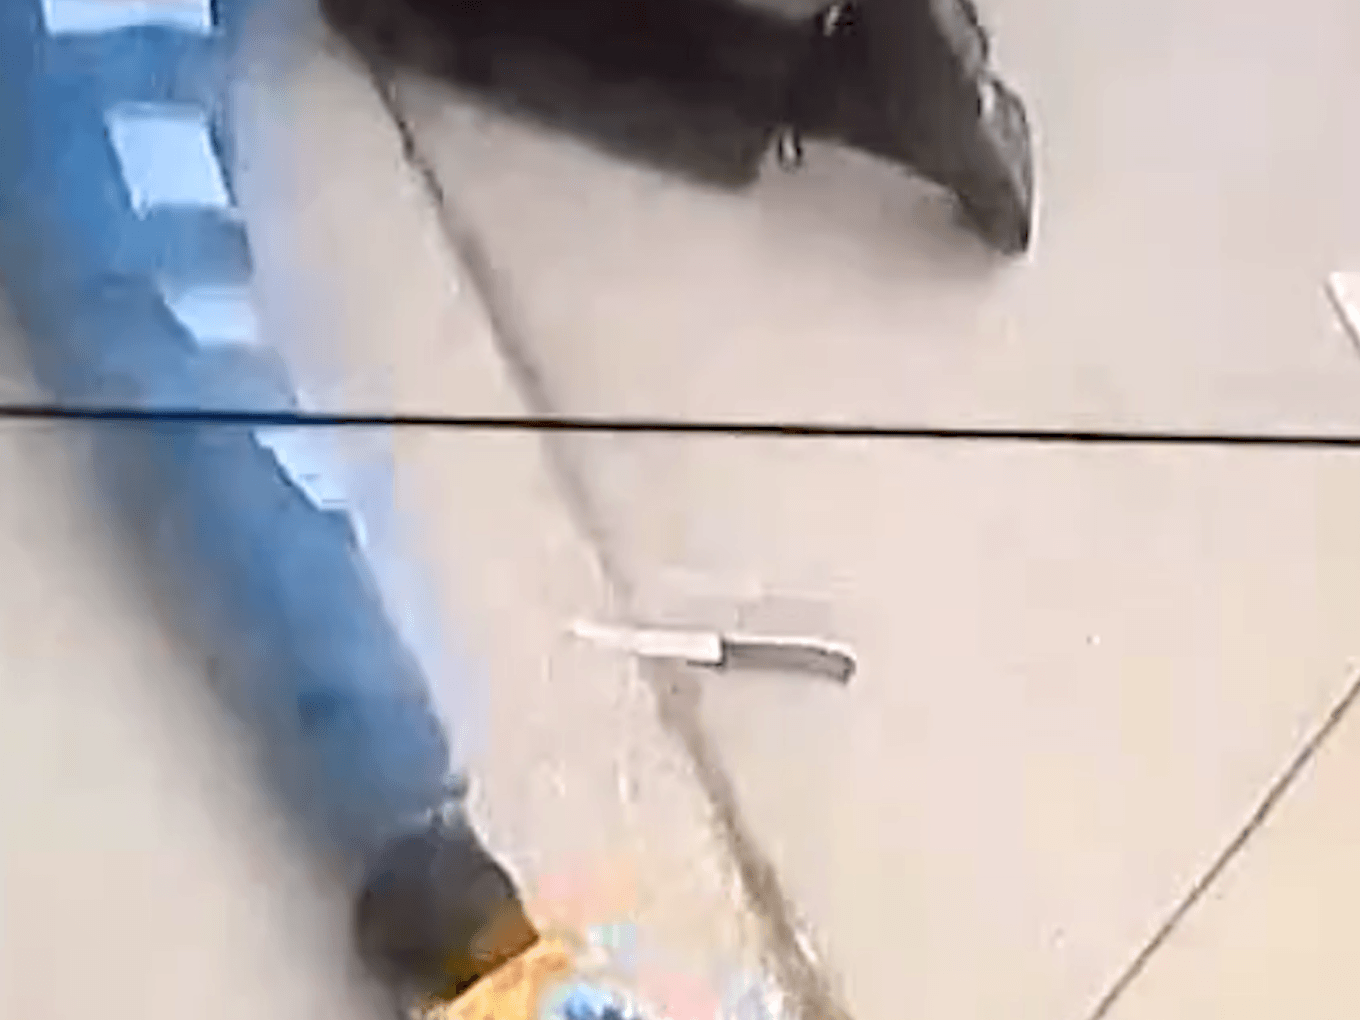 Screenshot from bodycam video showing the knife laying beside the teenage girl shot by police.